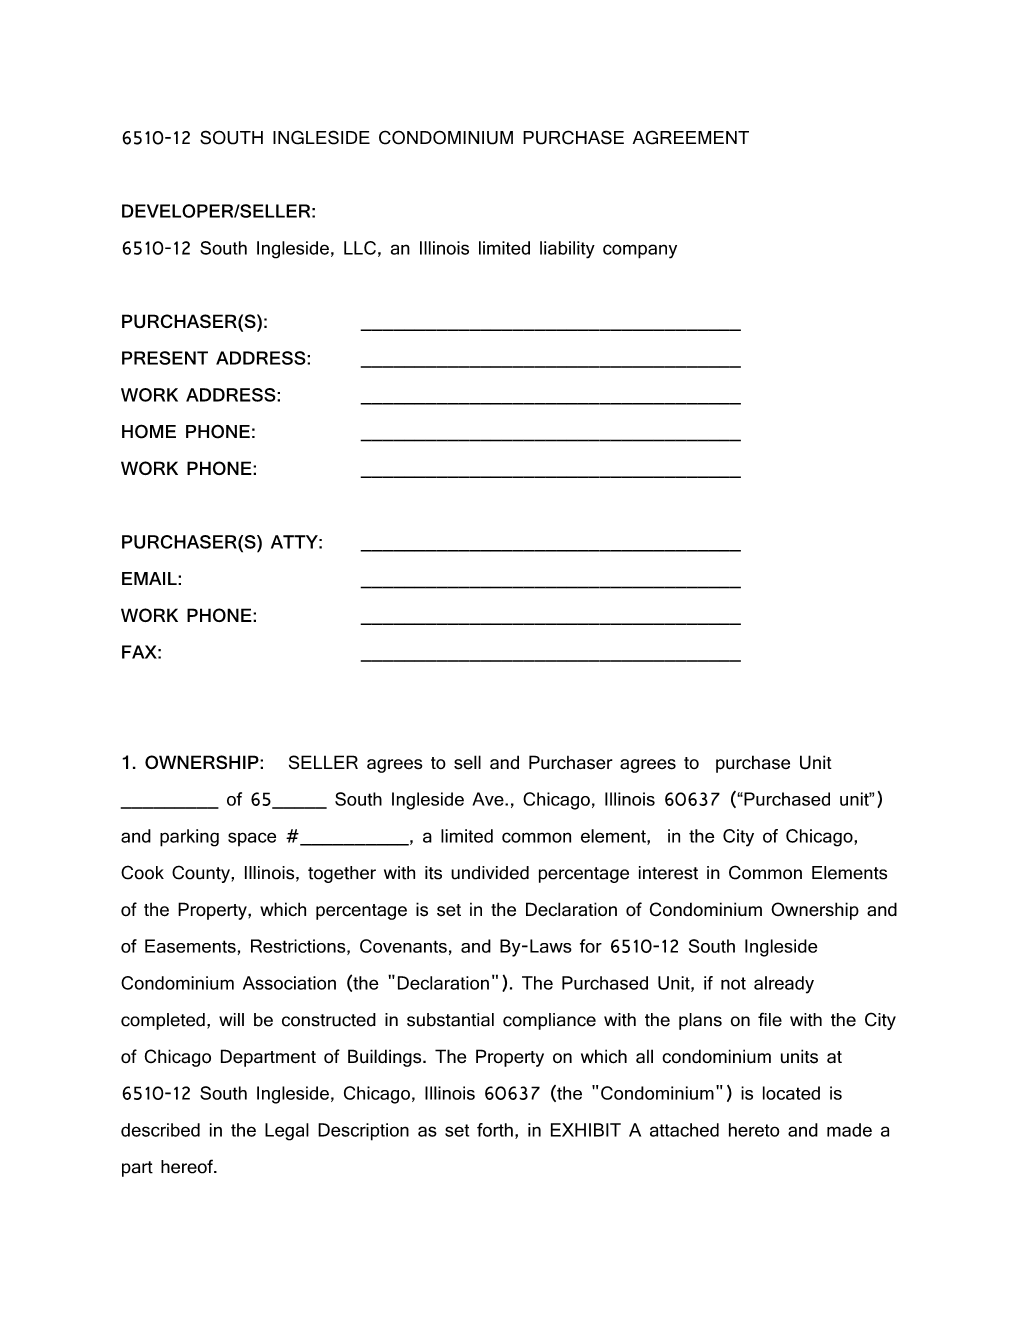 6420 South Woodlawn Condominium Purchase Agreement